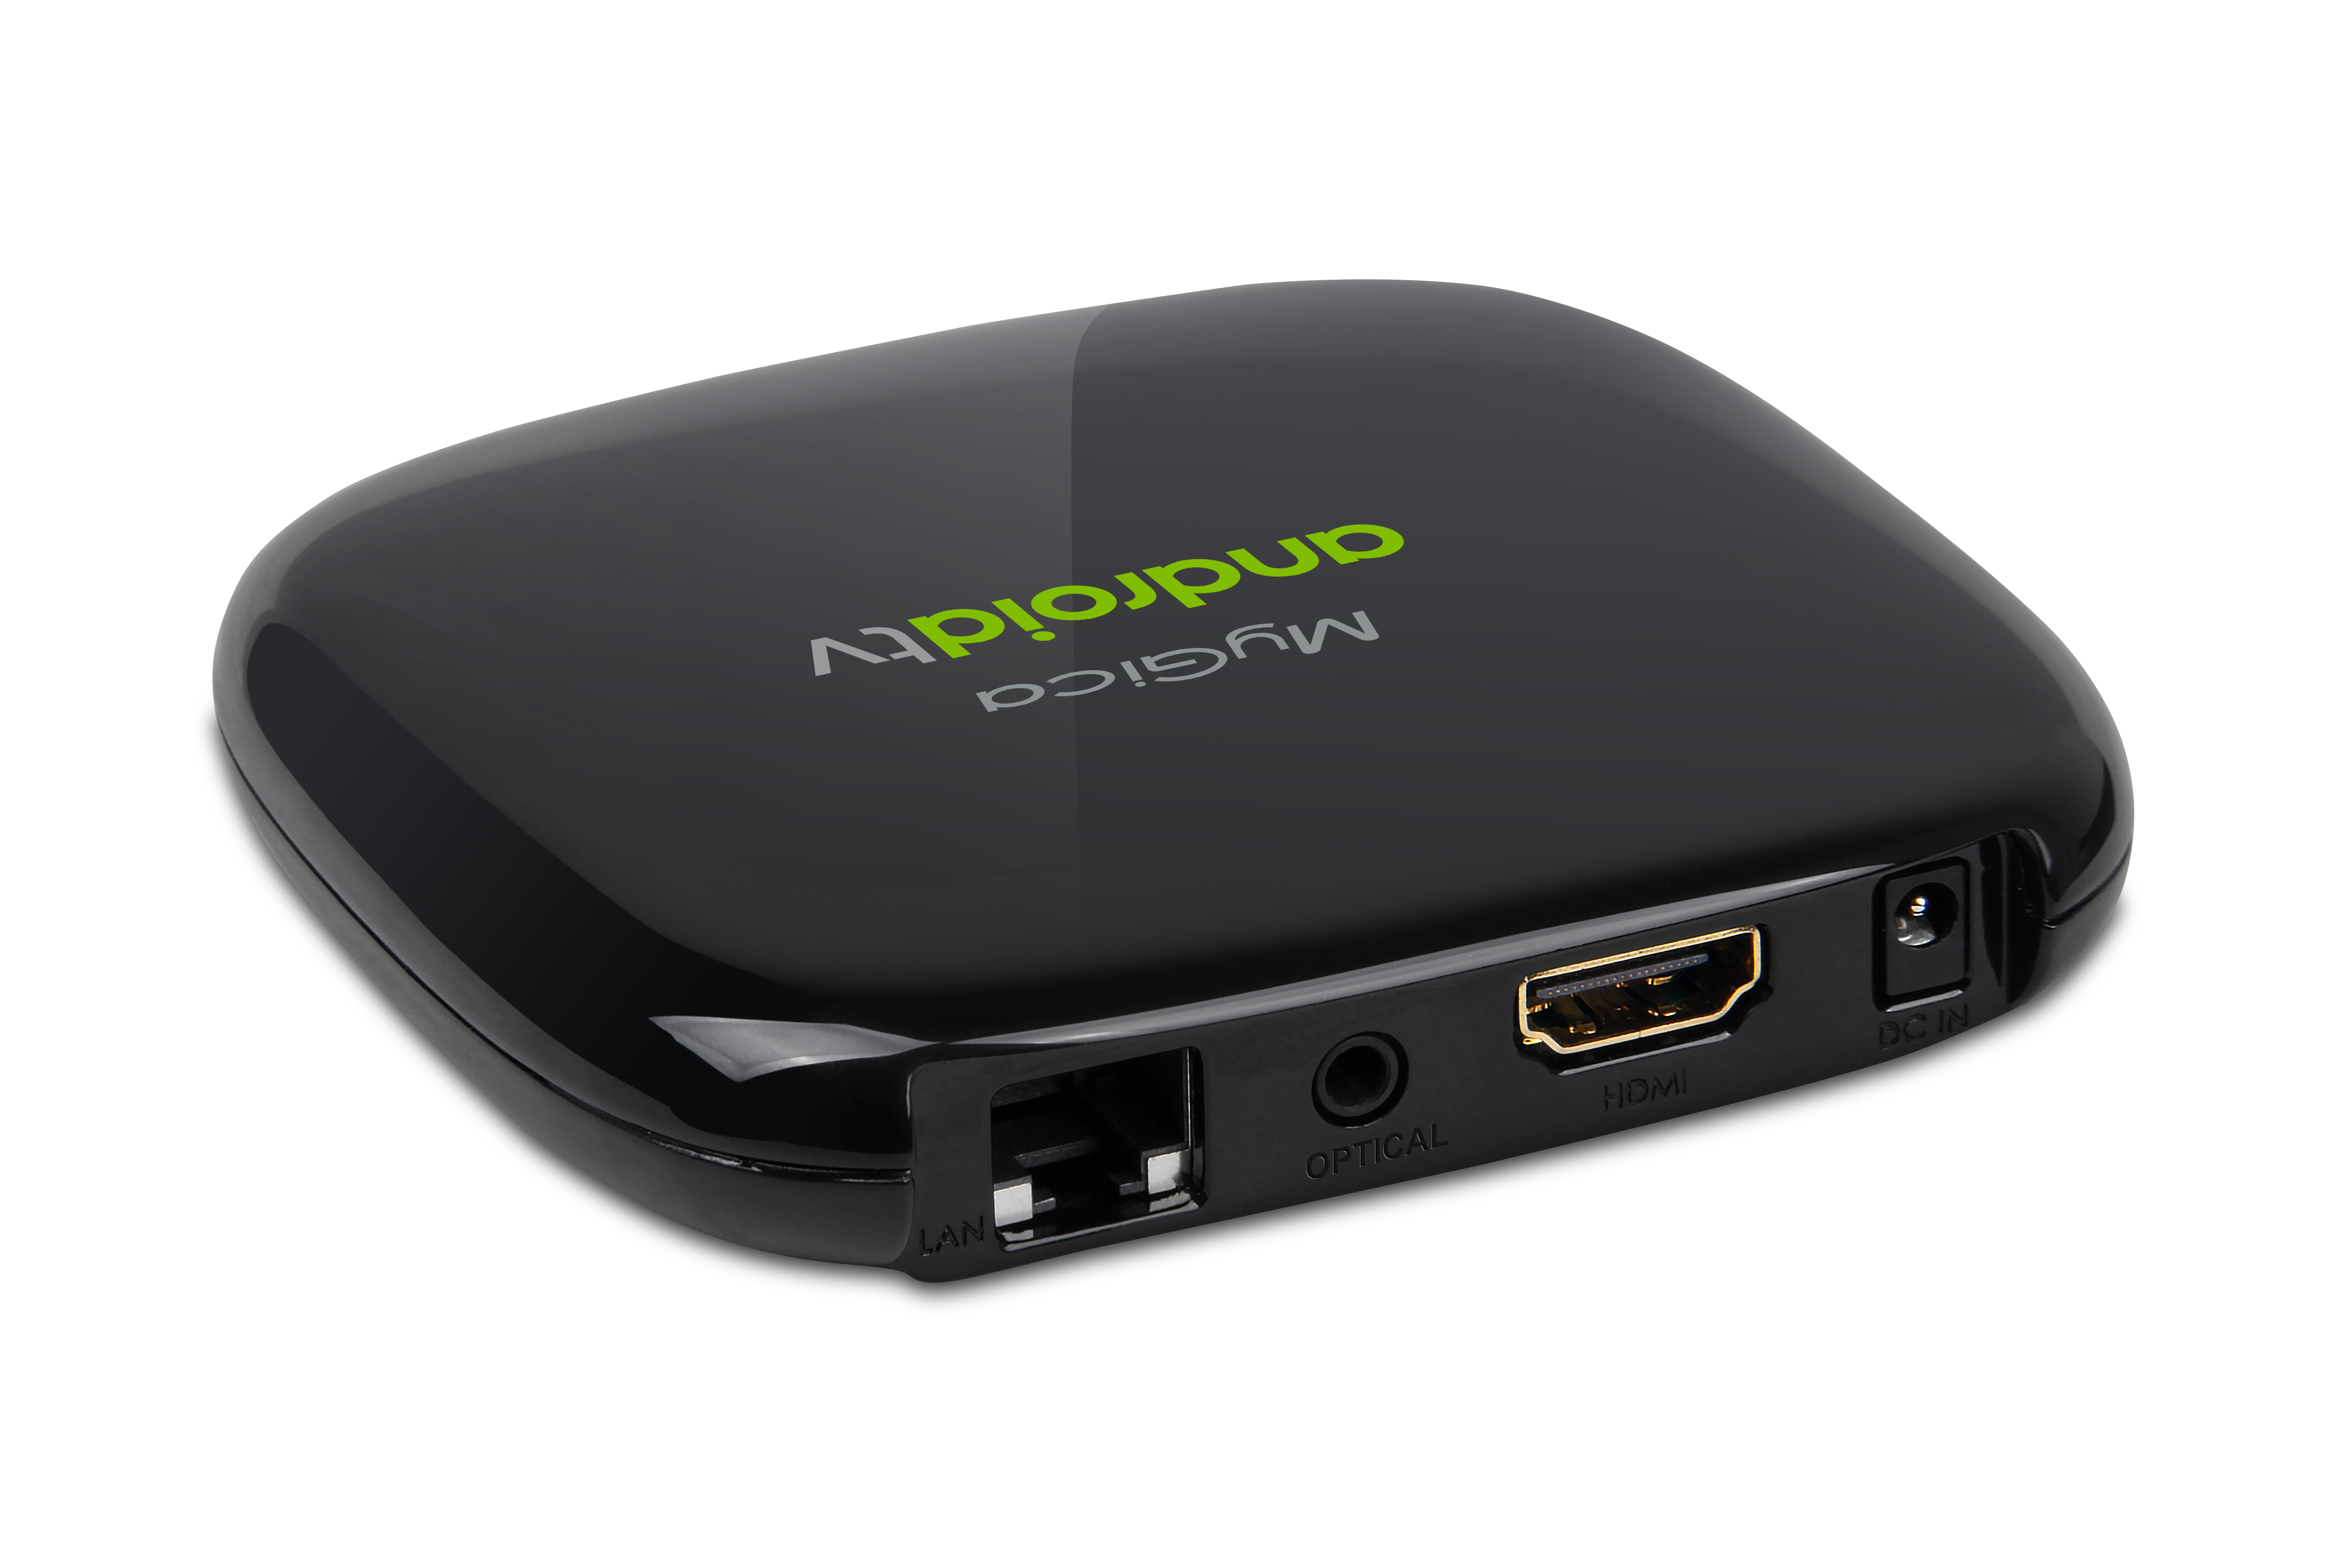 Openbox - MyGica ATV495MAX Certified AndroidTV Box